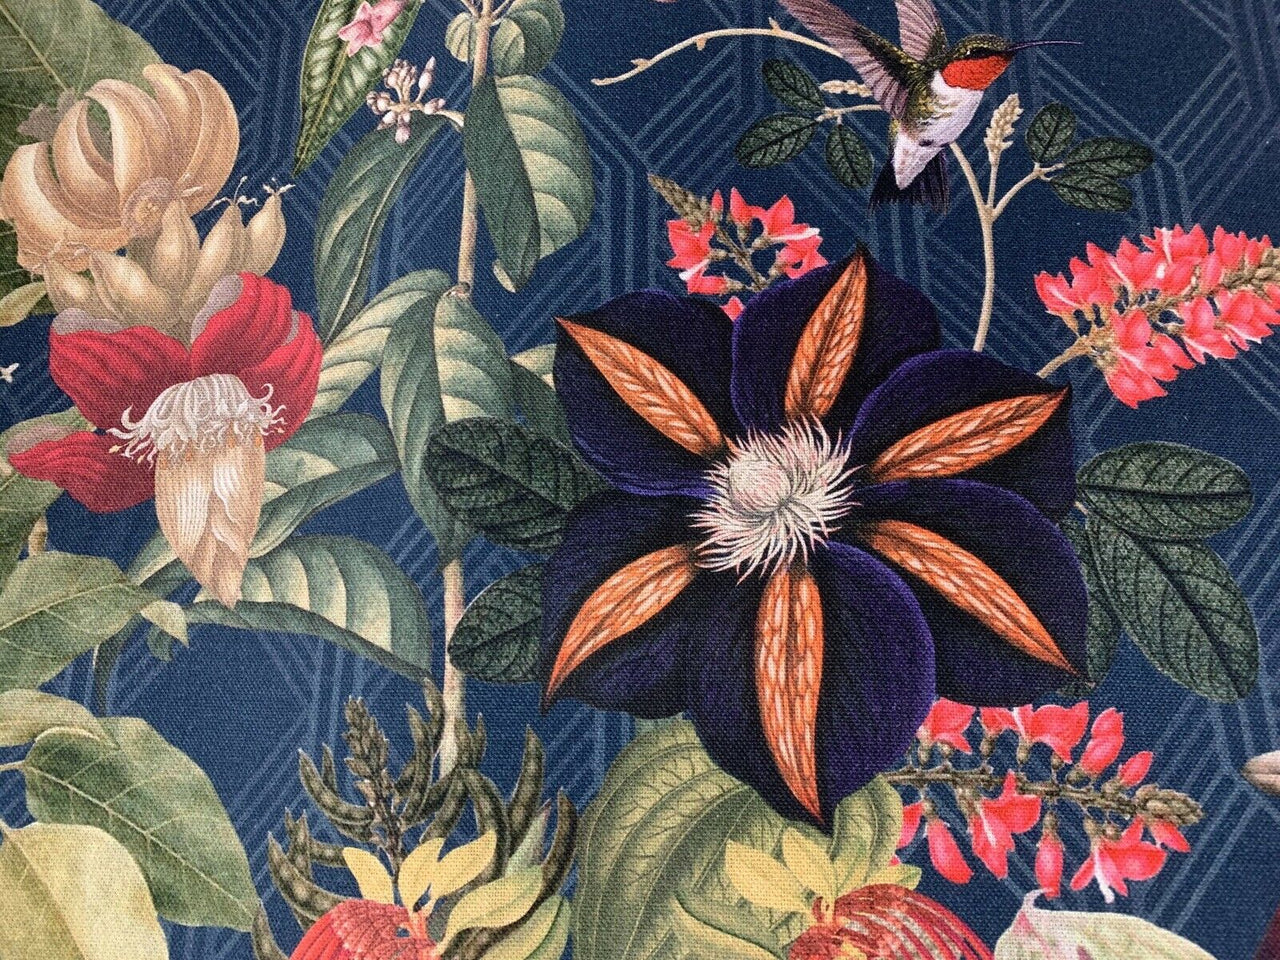 Monkey Toucan Birds Cotton Fabric By The Meter Blue Sewing Material Tropical Floral Textile For Pillows Cushions Crafts